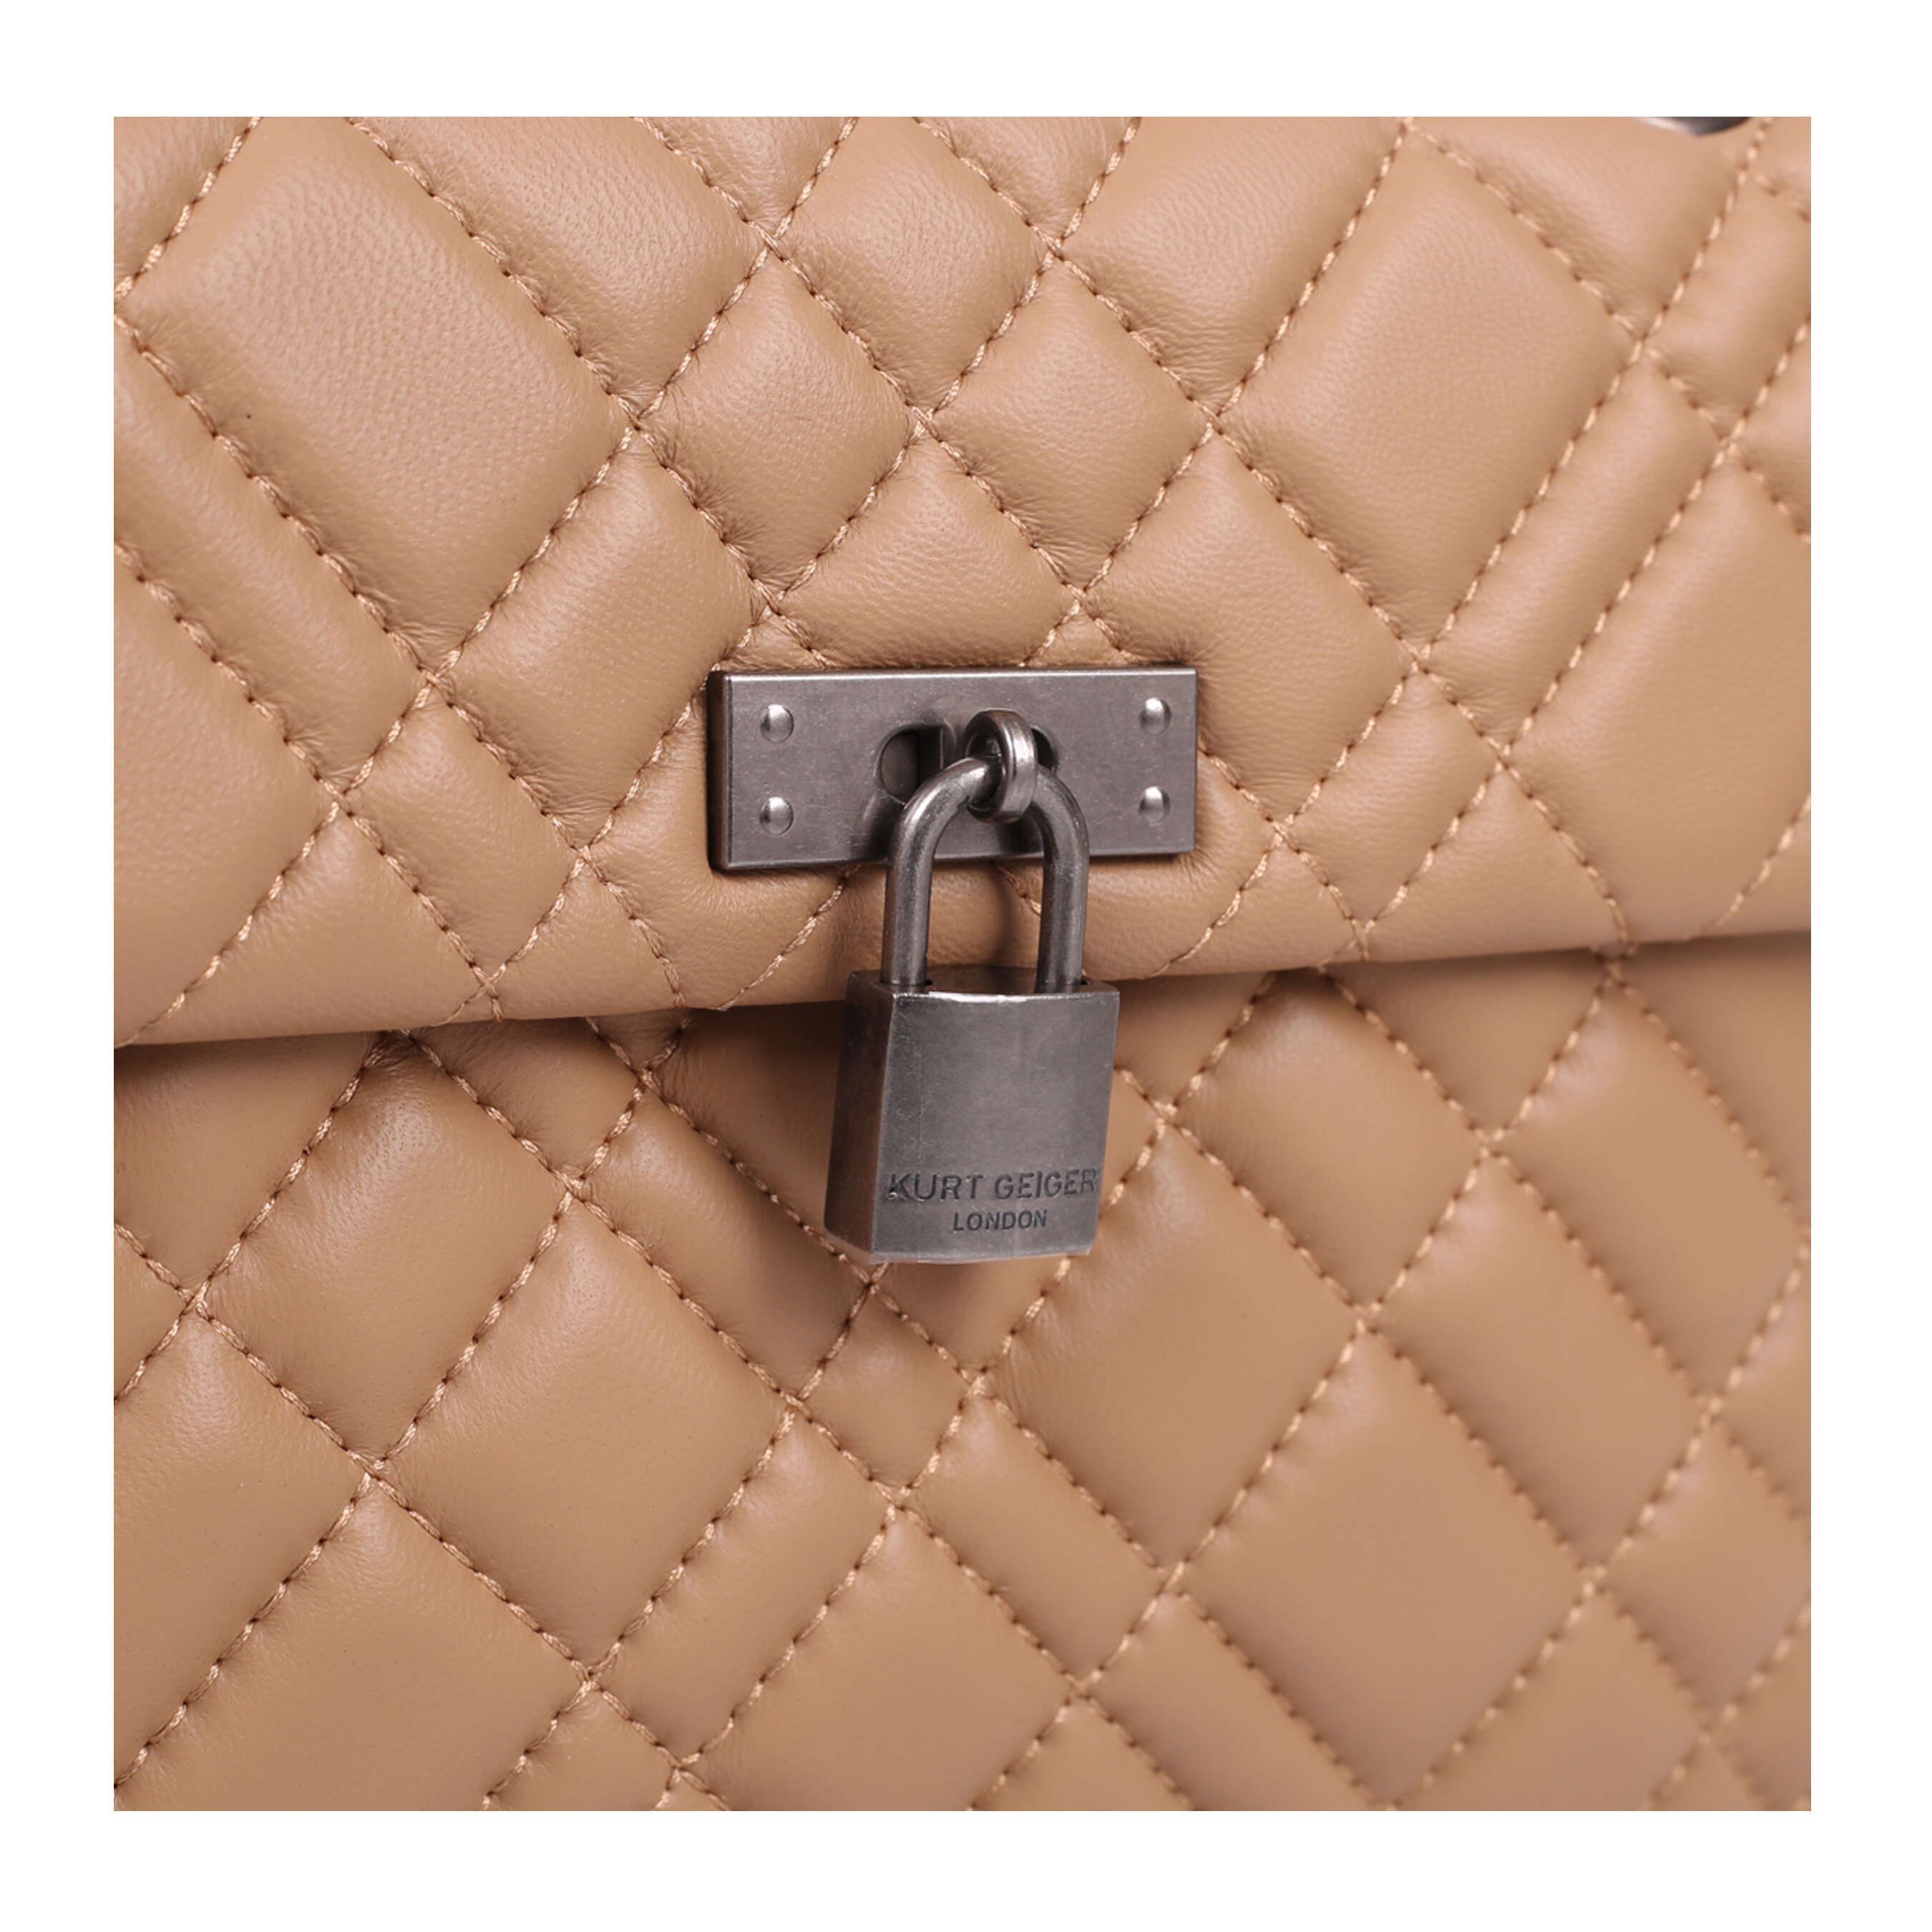 KGL Brixton Lock Bag is a leather quilted bag in camel, with the option of wearing on the shoulder or across the body.